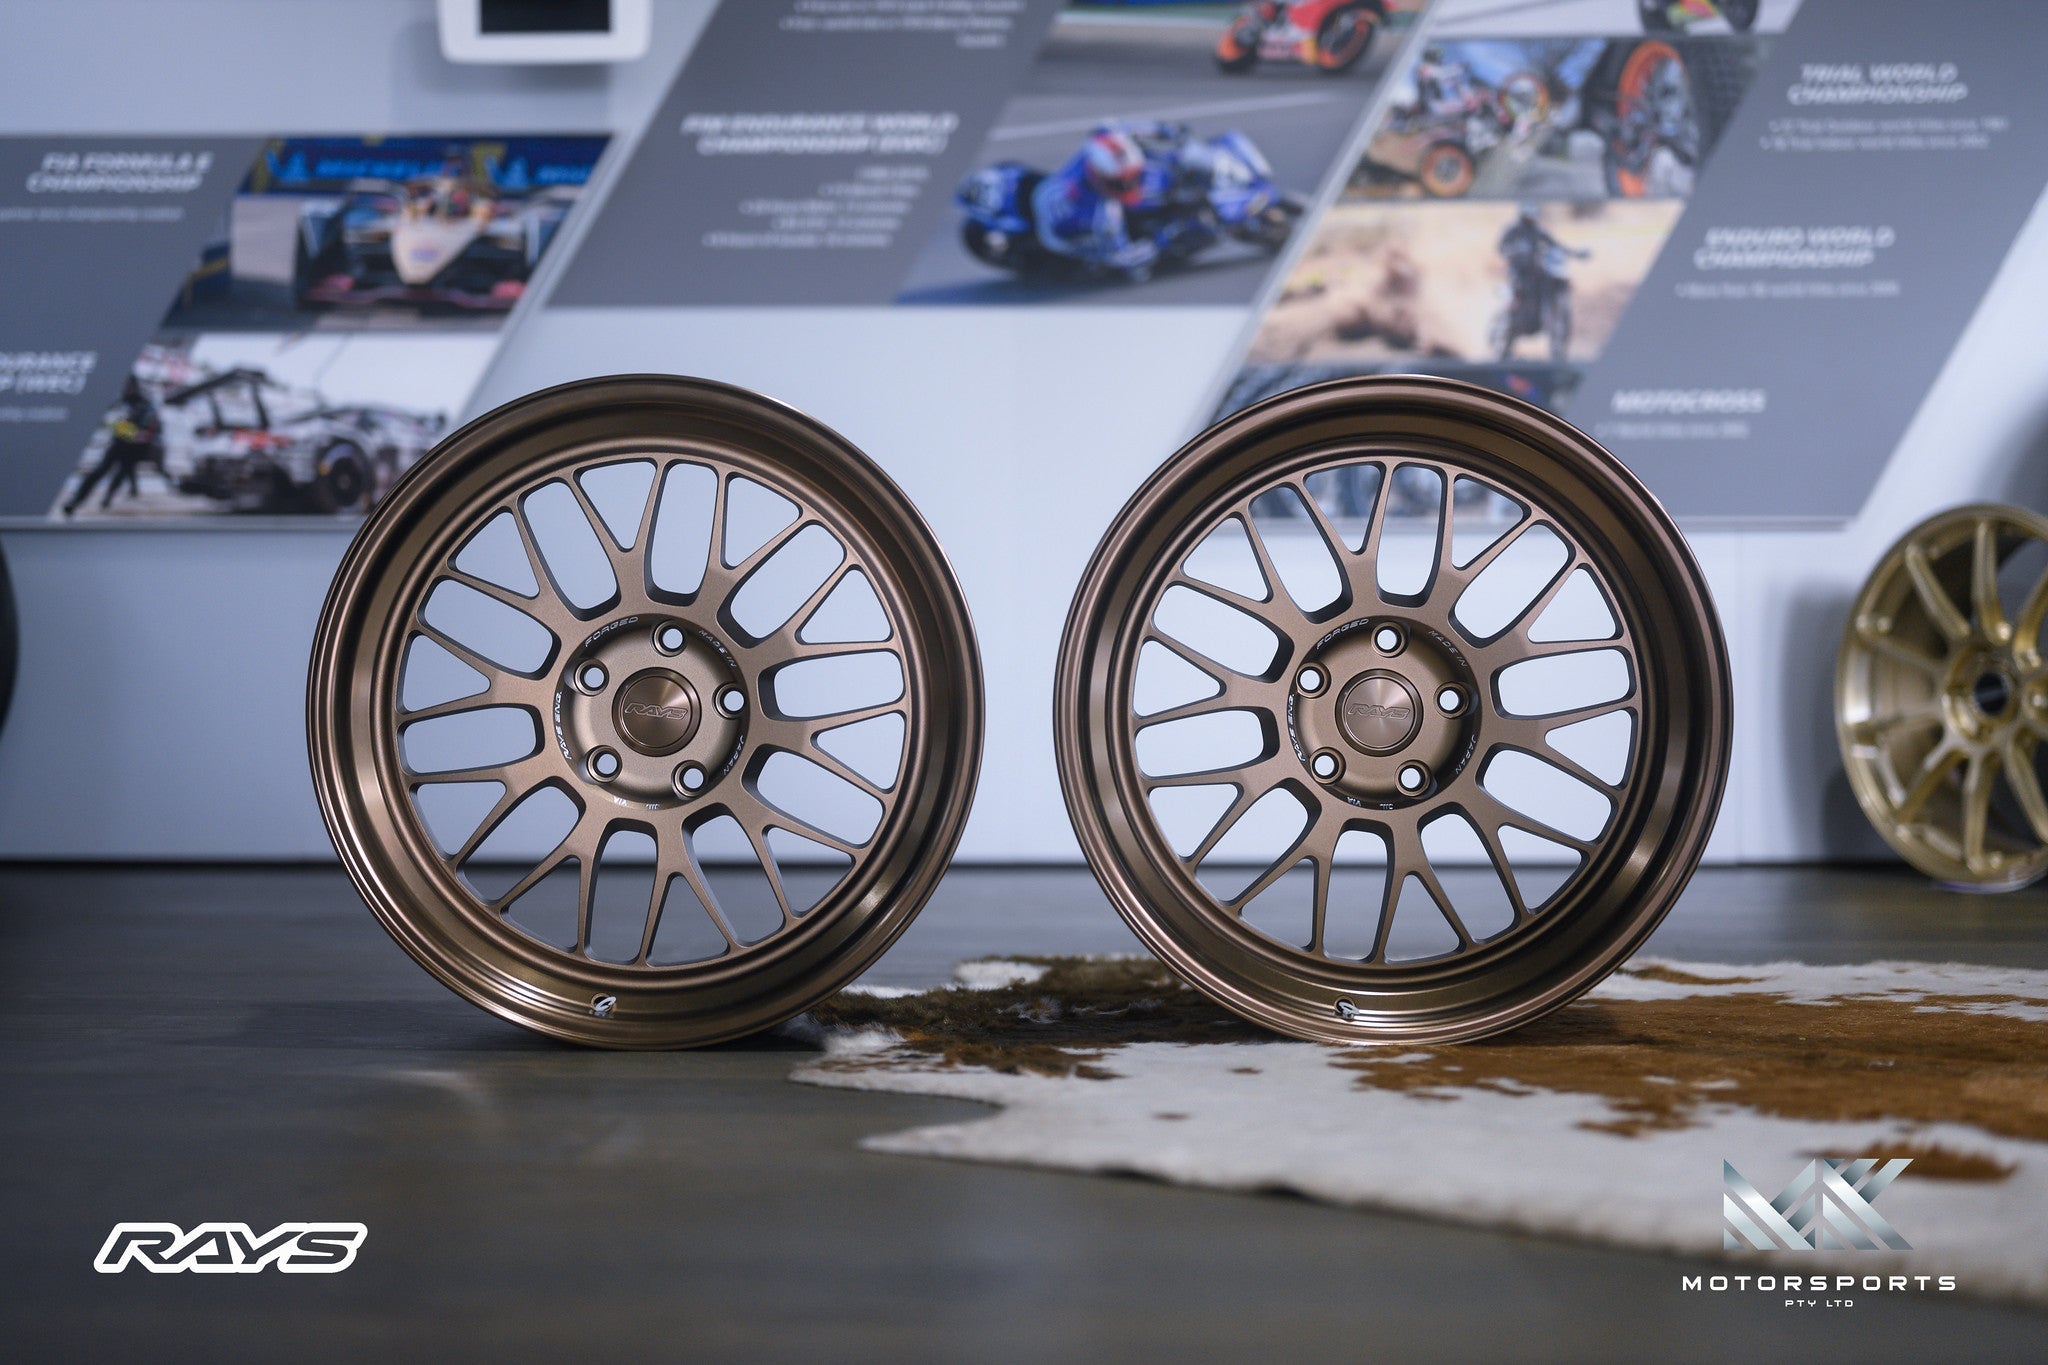 Volk Racing 21A - Premium Wheels from Volk Racing - From just $4090.00! Shop now at MK MOTORSPORTS